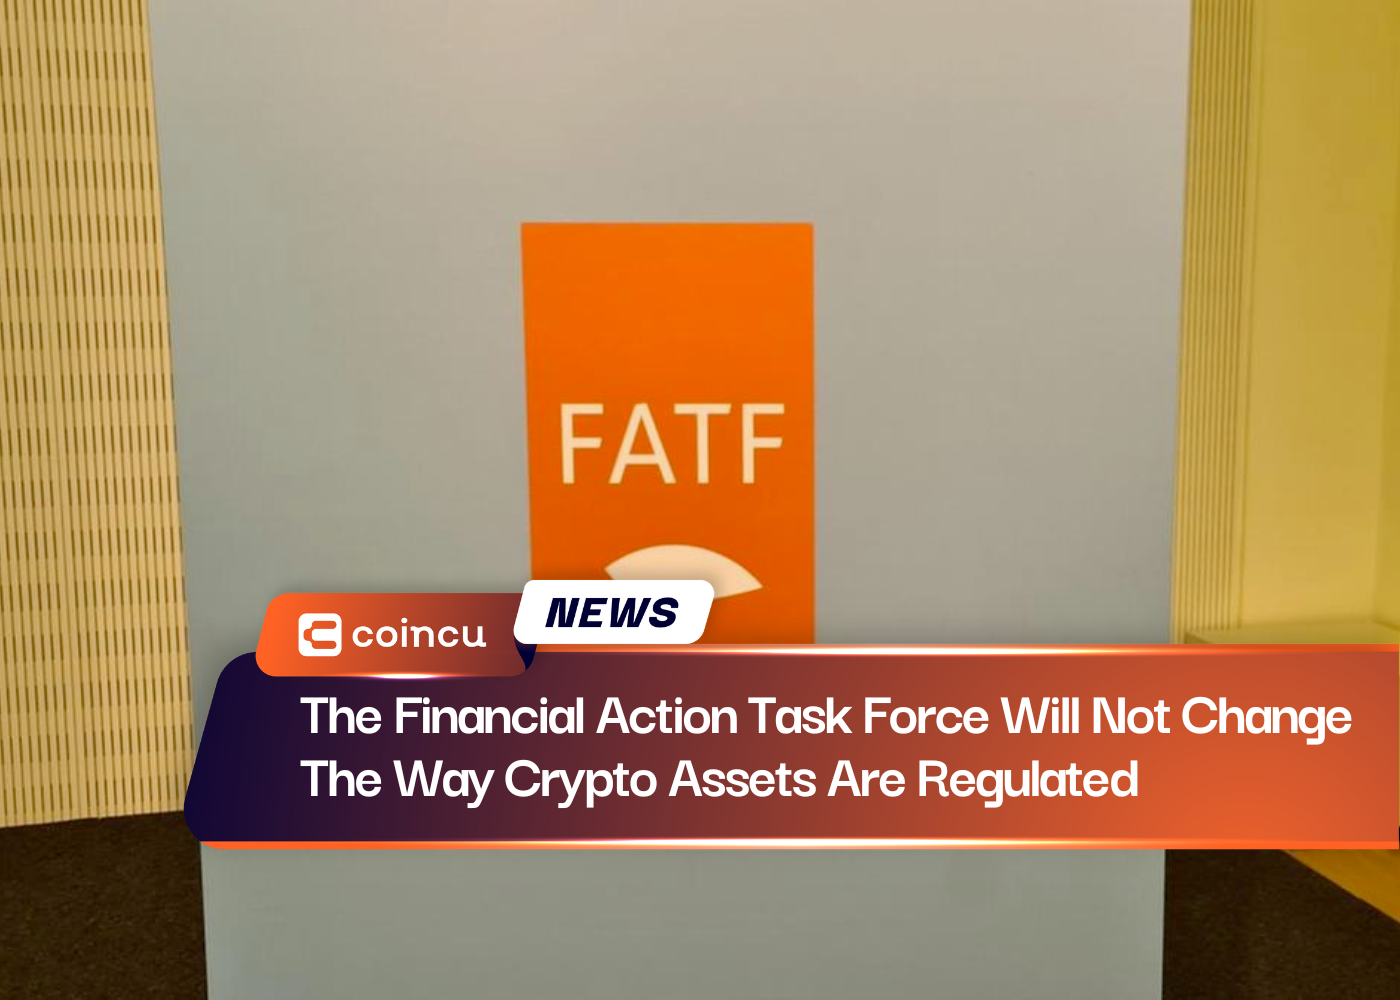 The FATF Will Not Change The Way Crypto Assets Are Regulated